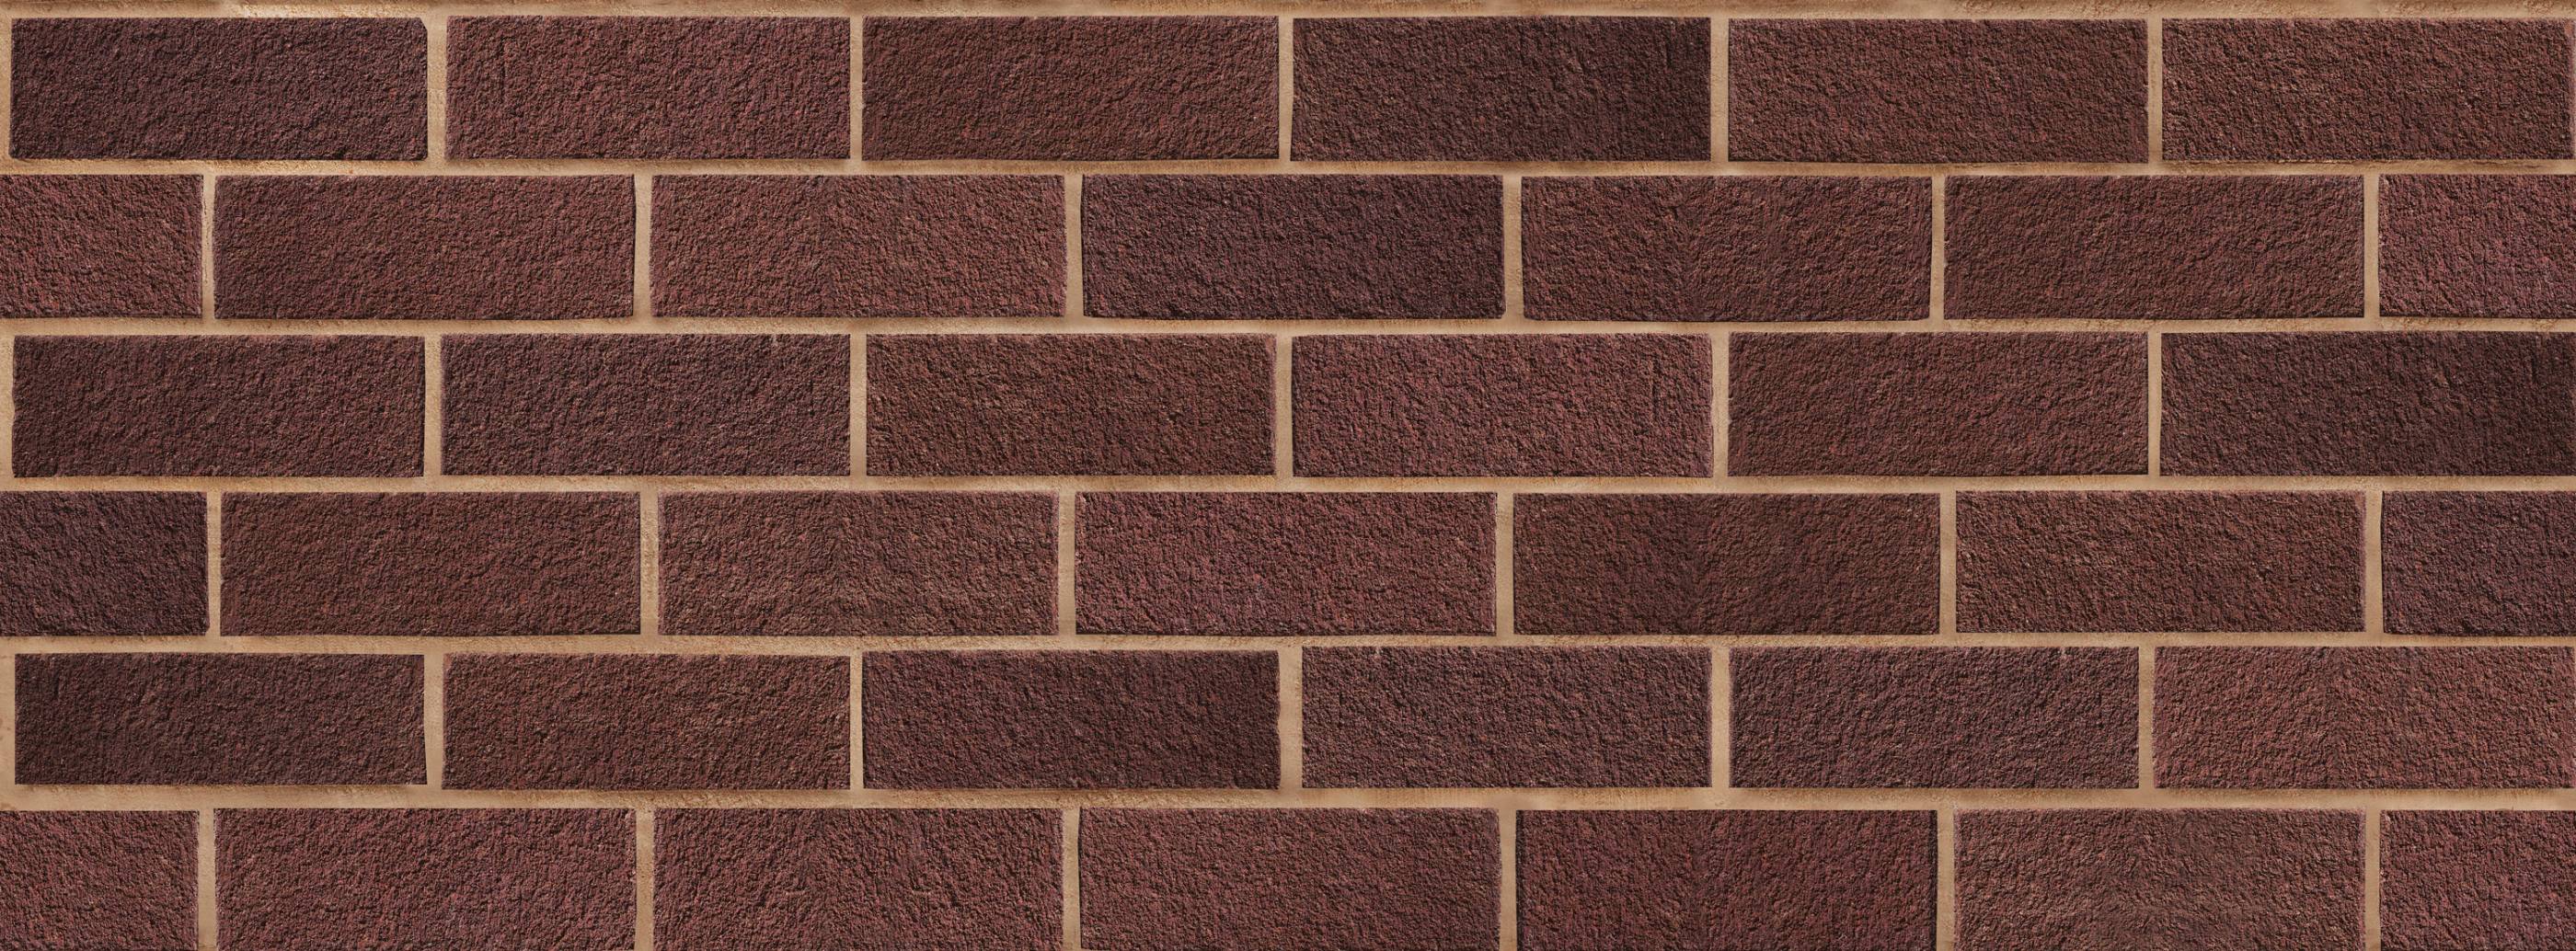 Carlton Willerby Red Clay Brick - Imperial